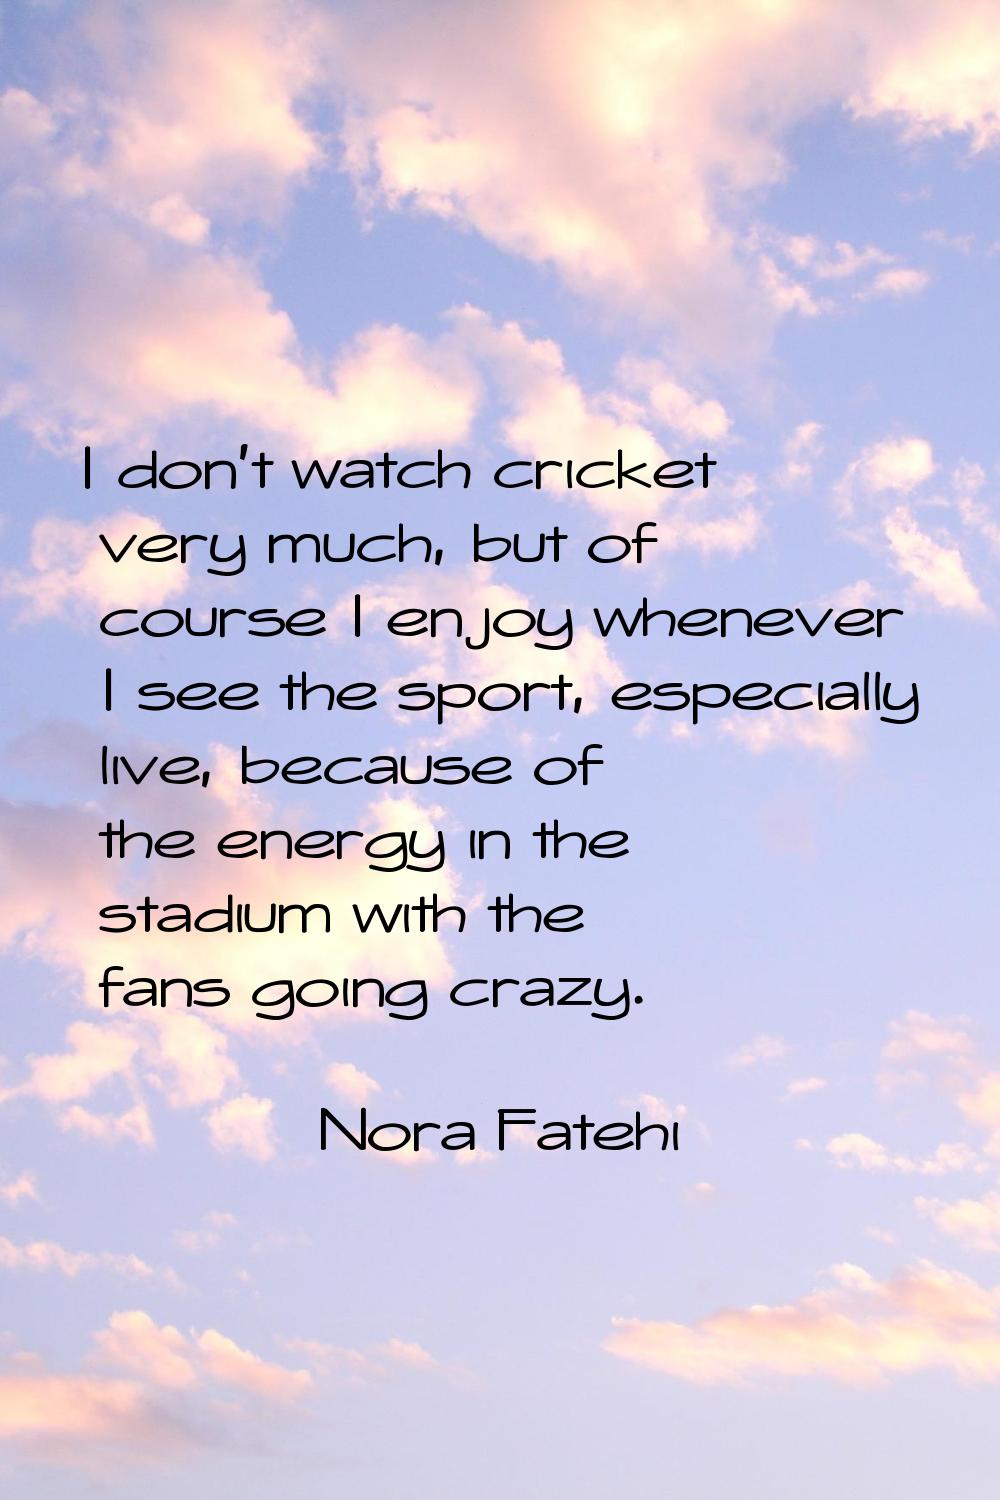 I don't watch cricket very much, but of course I enjoy whenever I see the sport, especially live, b